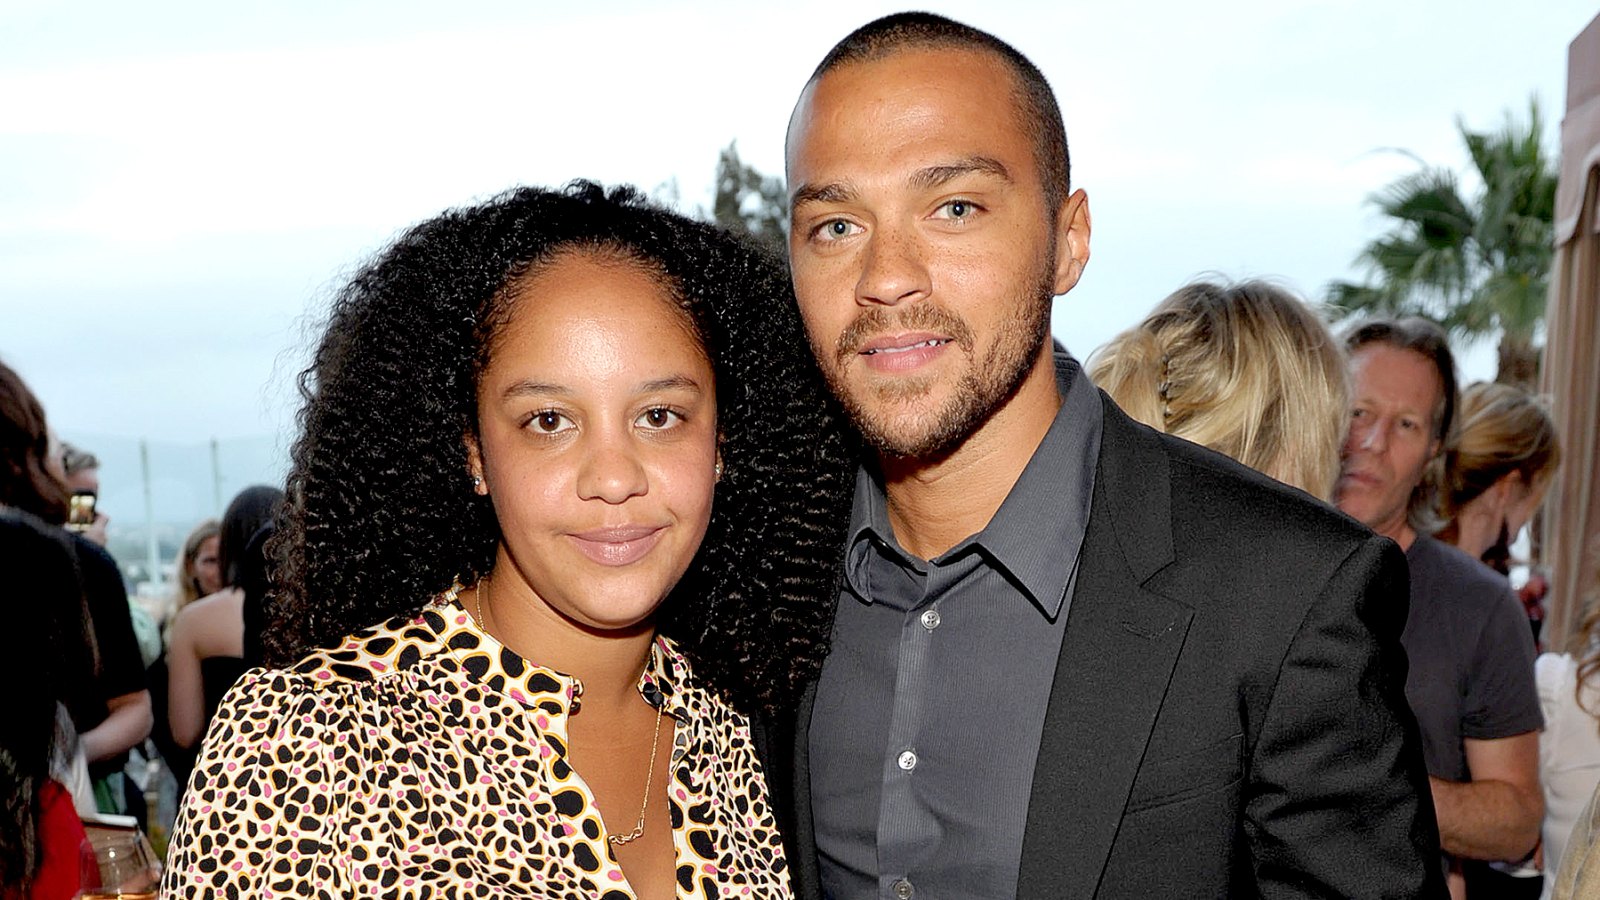 Jesse Williams and Aryn Drake-Lee attend the "GQ, Nautica, and Oceana World Oceans Day Party" at Sunset Tower on June 8, 2010 in West Hollywood, California.